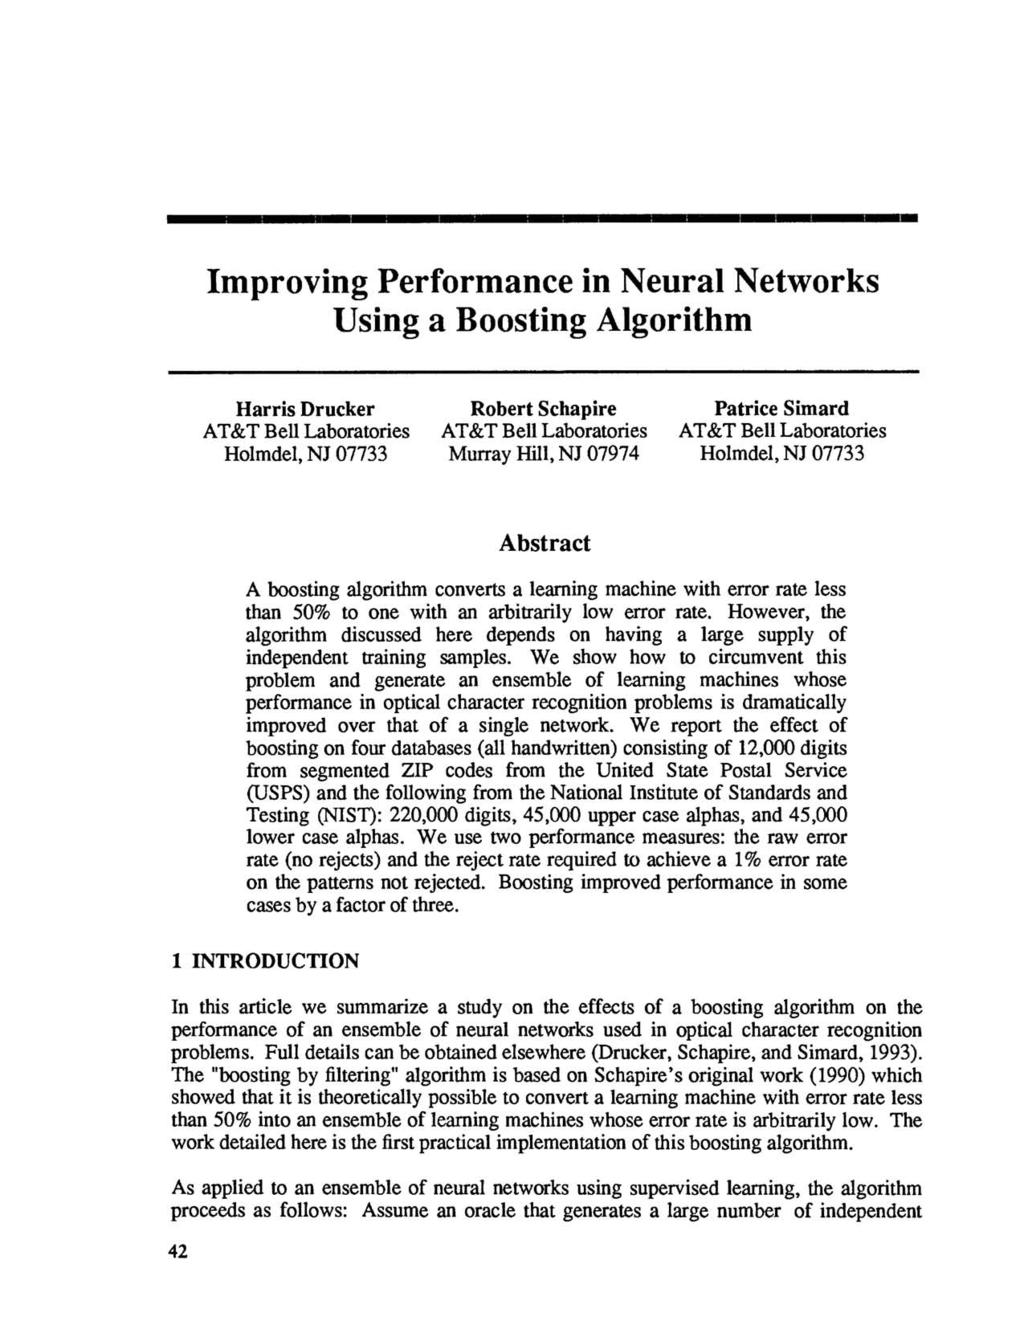 - Improving Performance in Neural Networks Using a Boosting Algorithm Harris Drucker AT&T Bell Laboratories Holmdel, NJ 07733 Robert Schapire AT&T Bell Laboratories Murray Hill, NJ 07974 Patrice